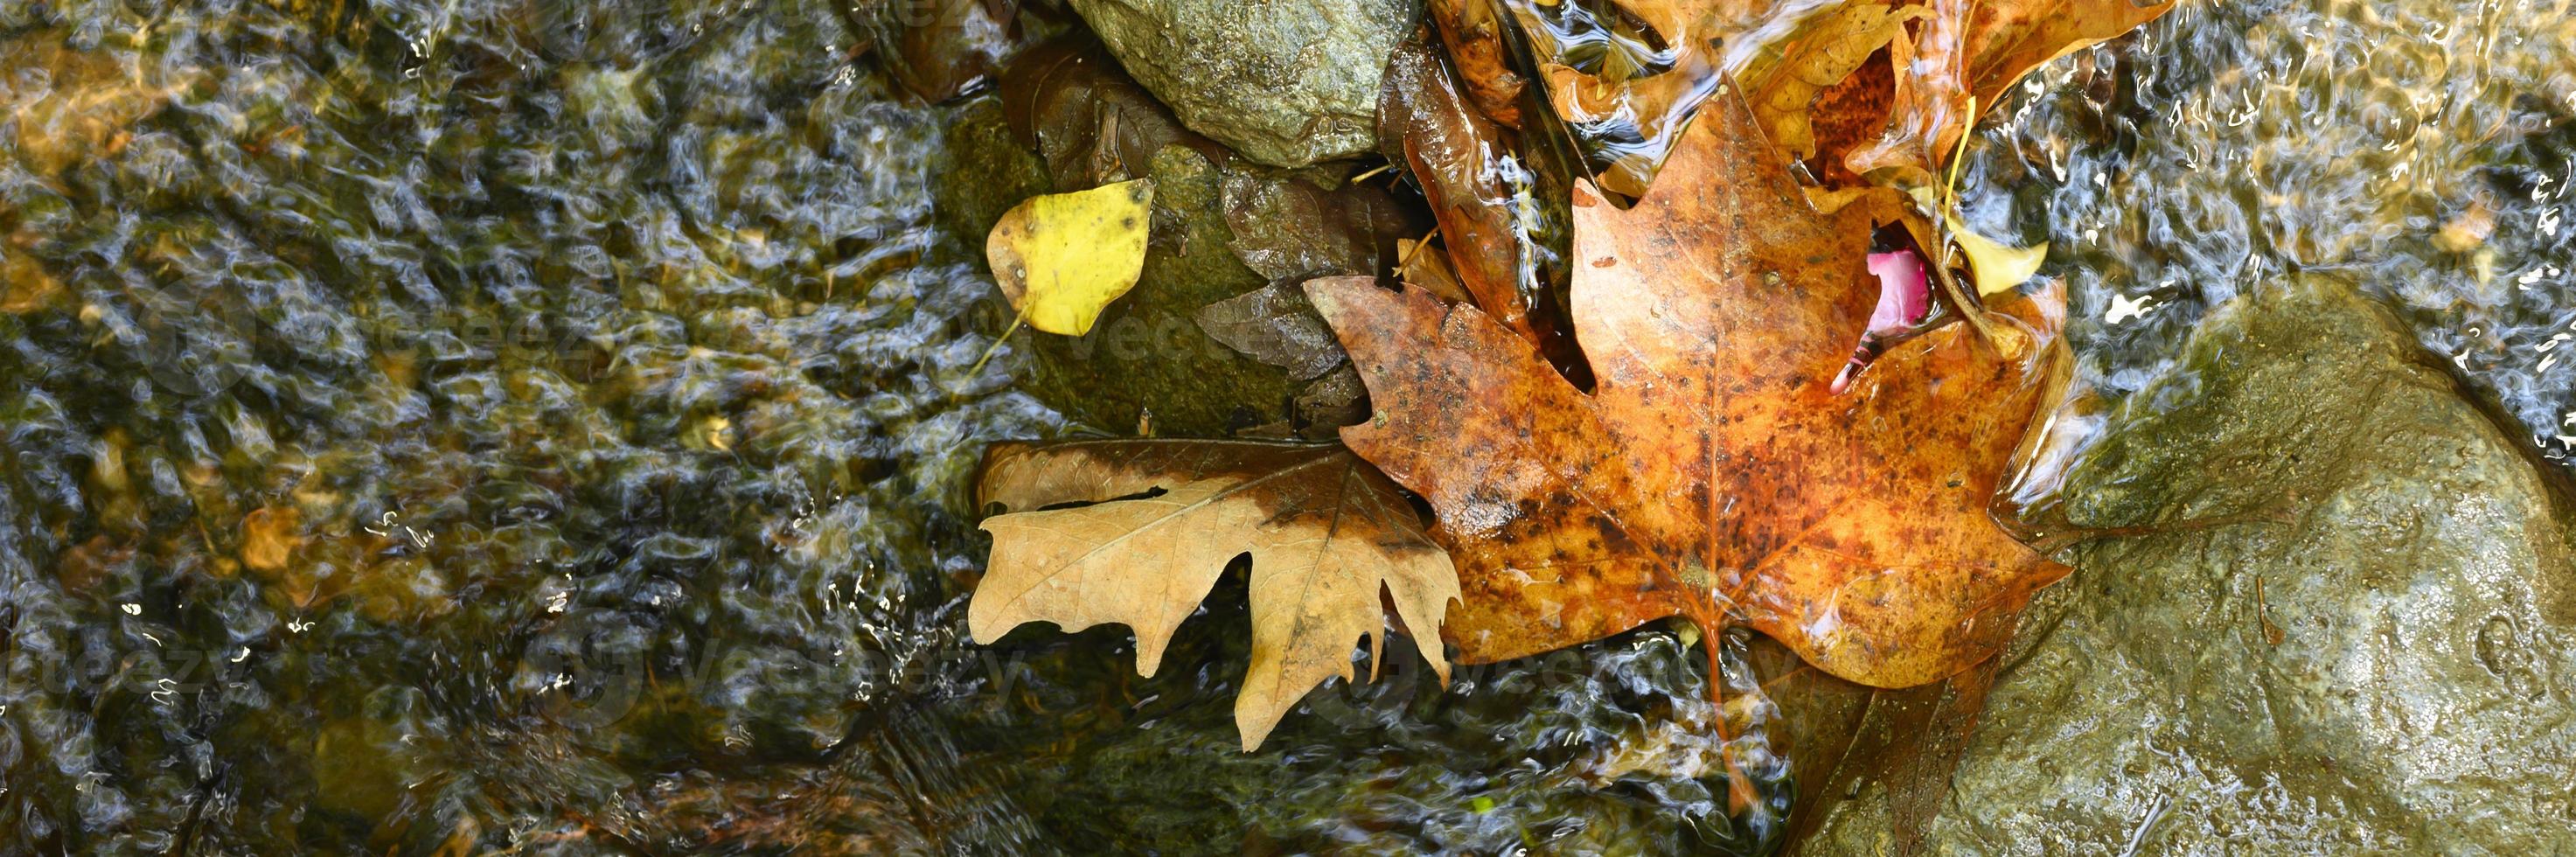 Wet fallen autumn maple leaves in the water and rocks photo